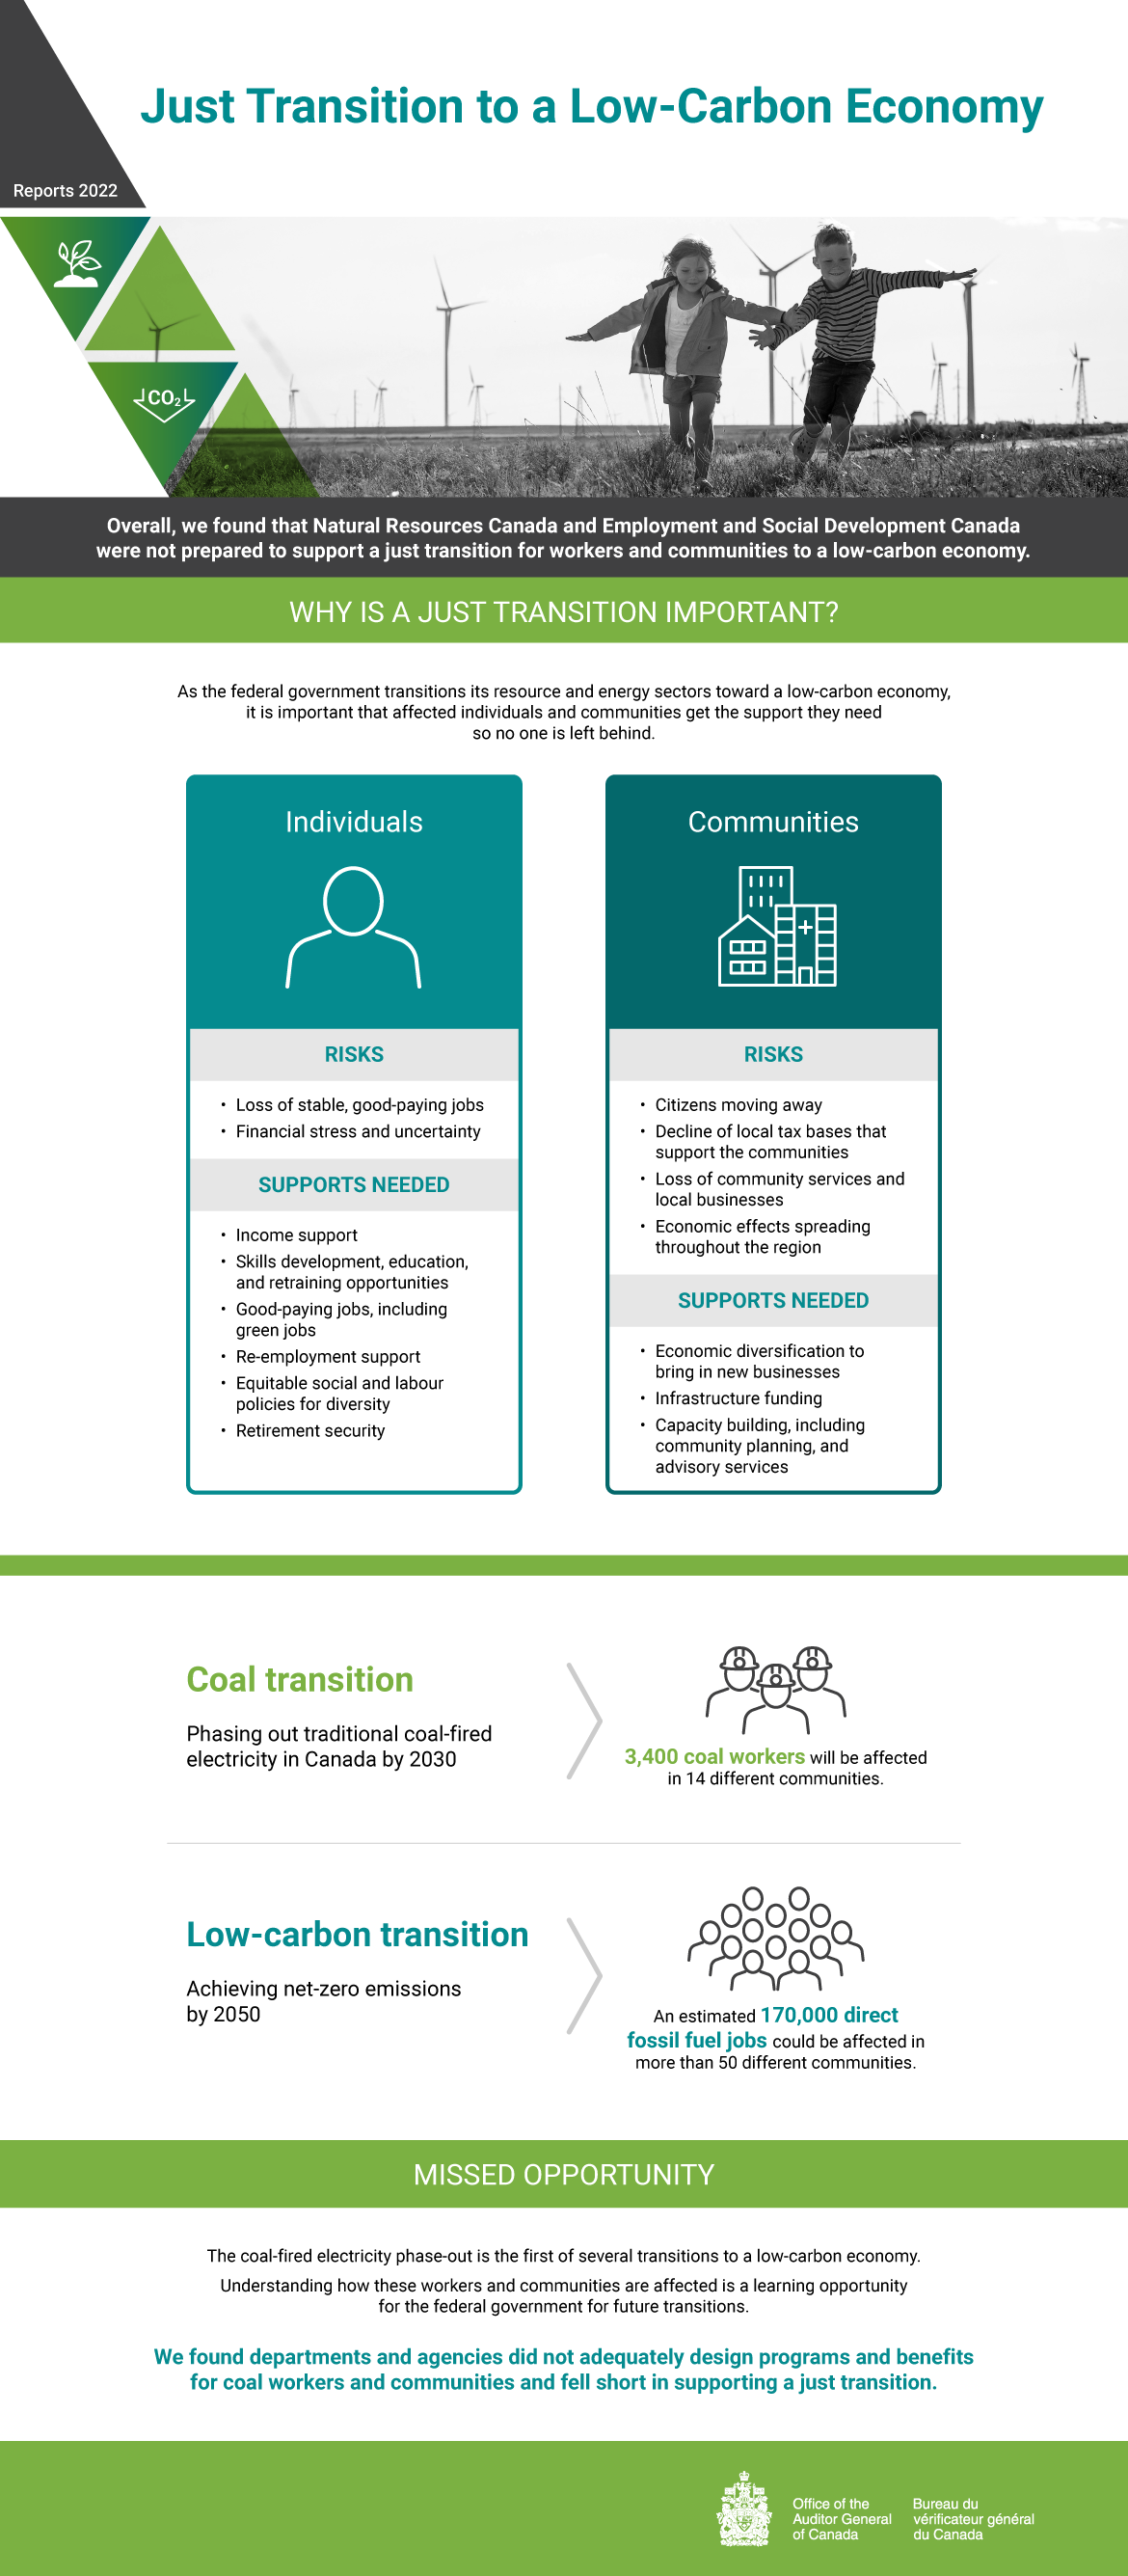 Infographic presenting findings from the 2022 audit report on a just transition to a low-carbon economy